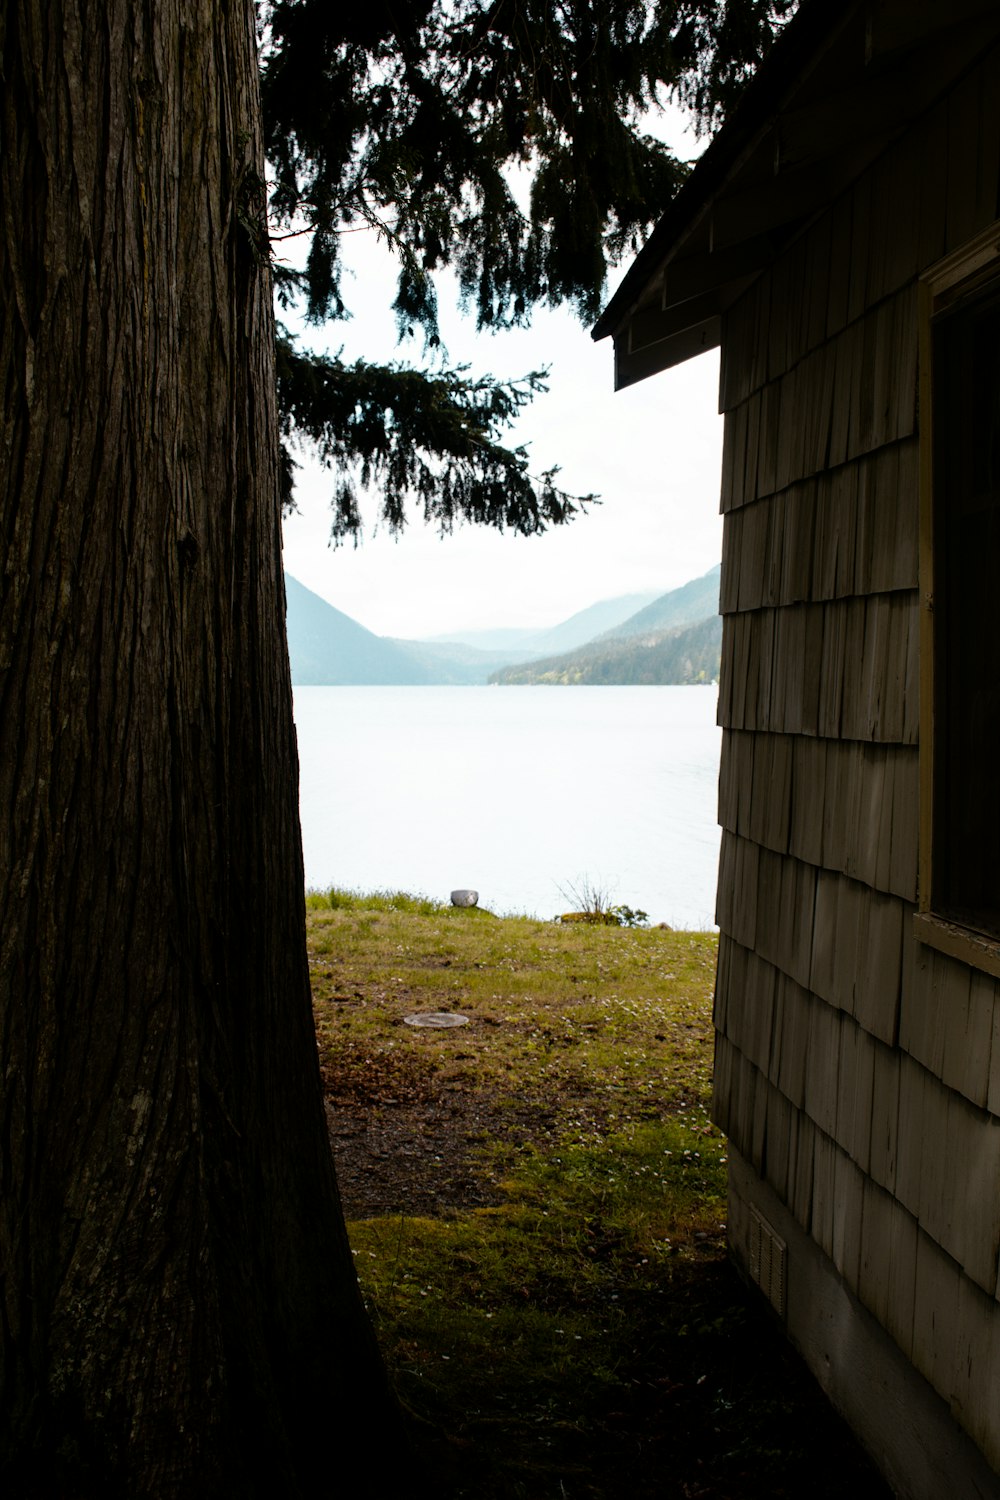 a view of a body of water from behind a tree